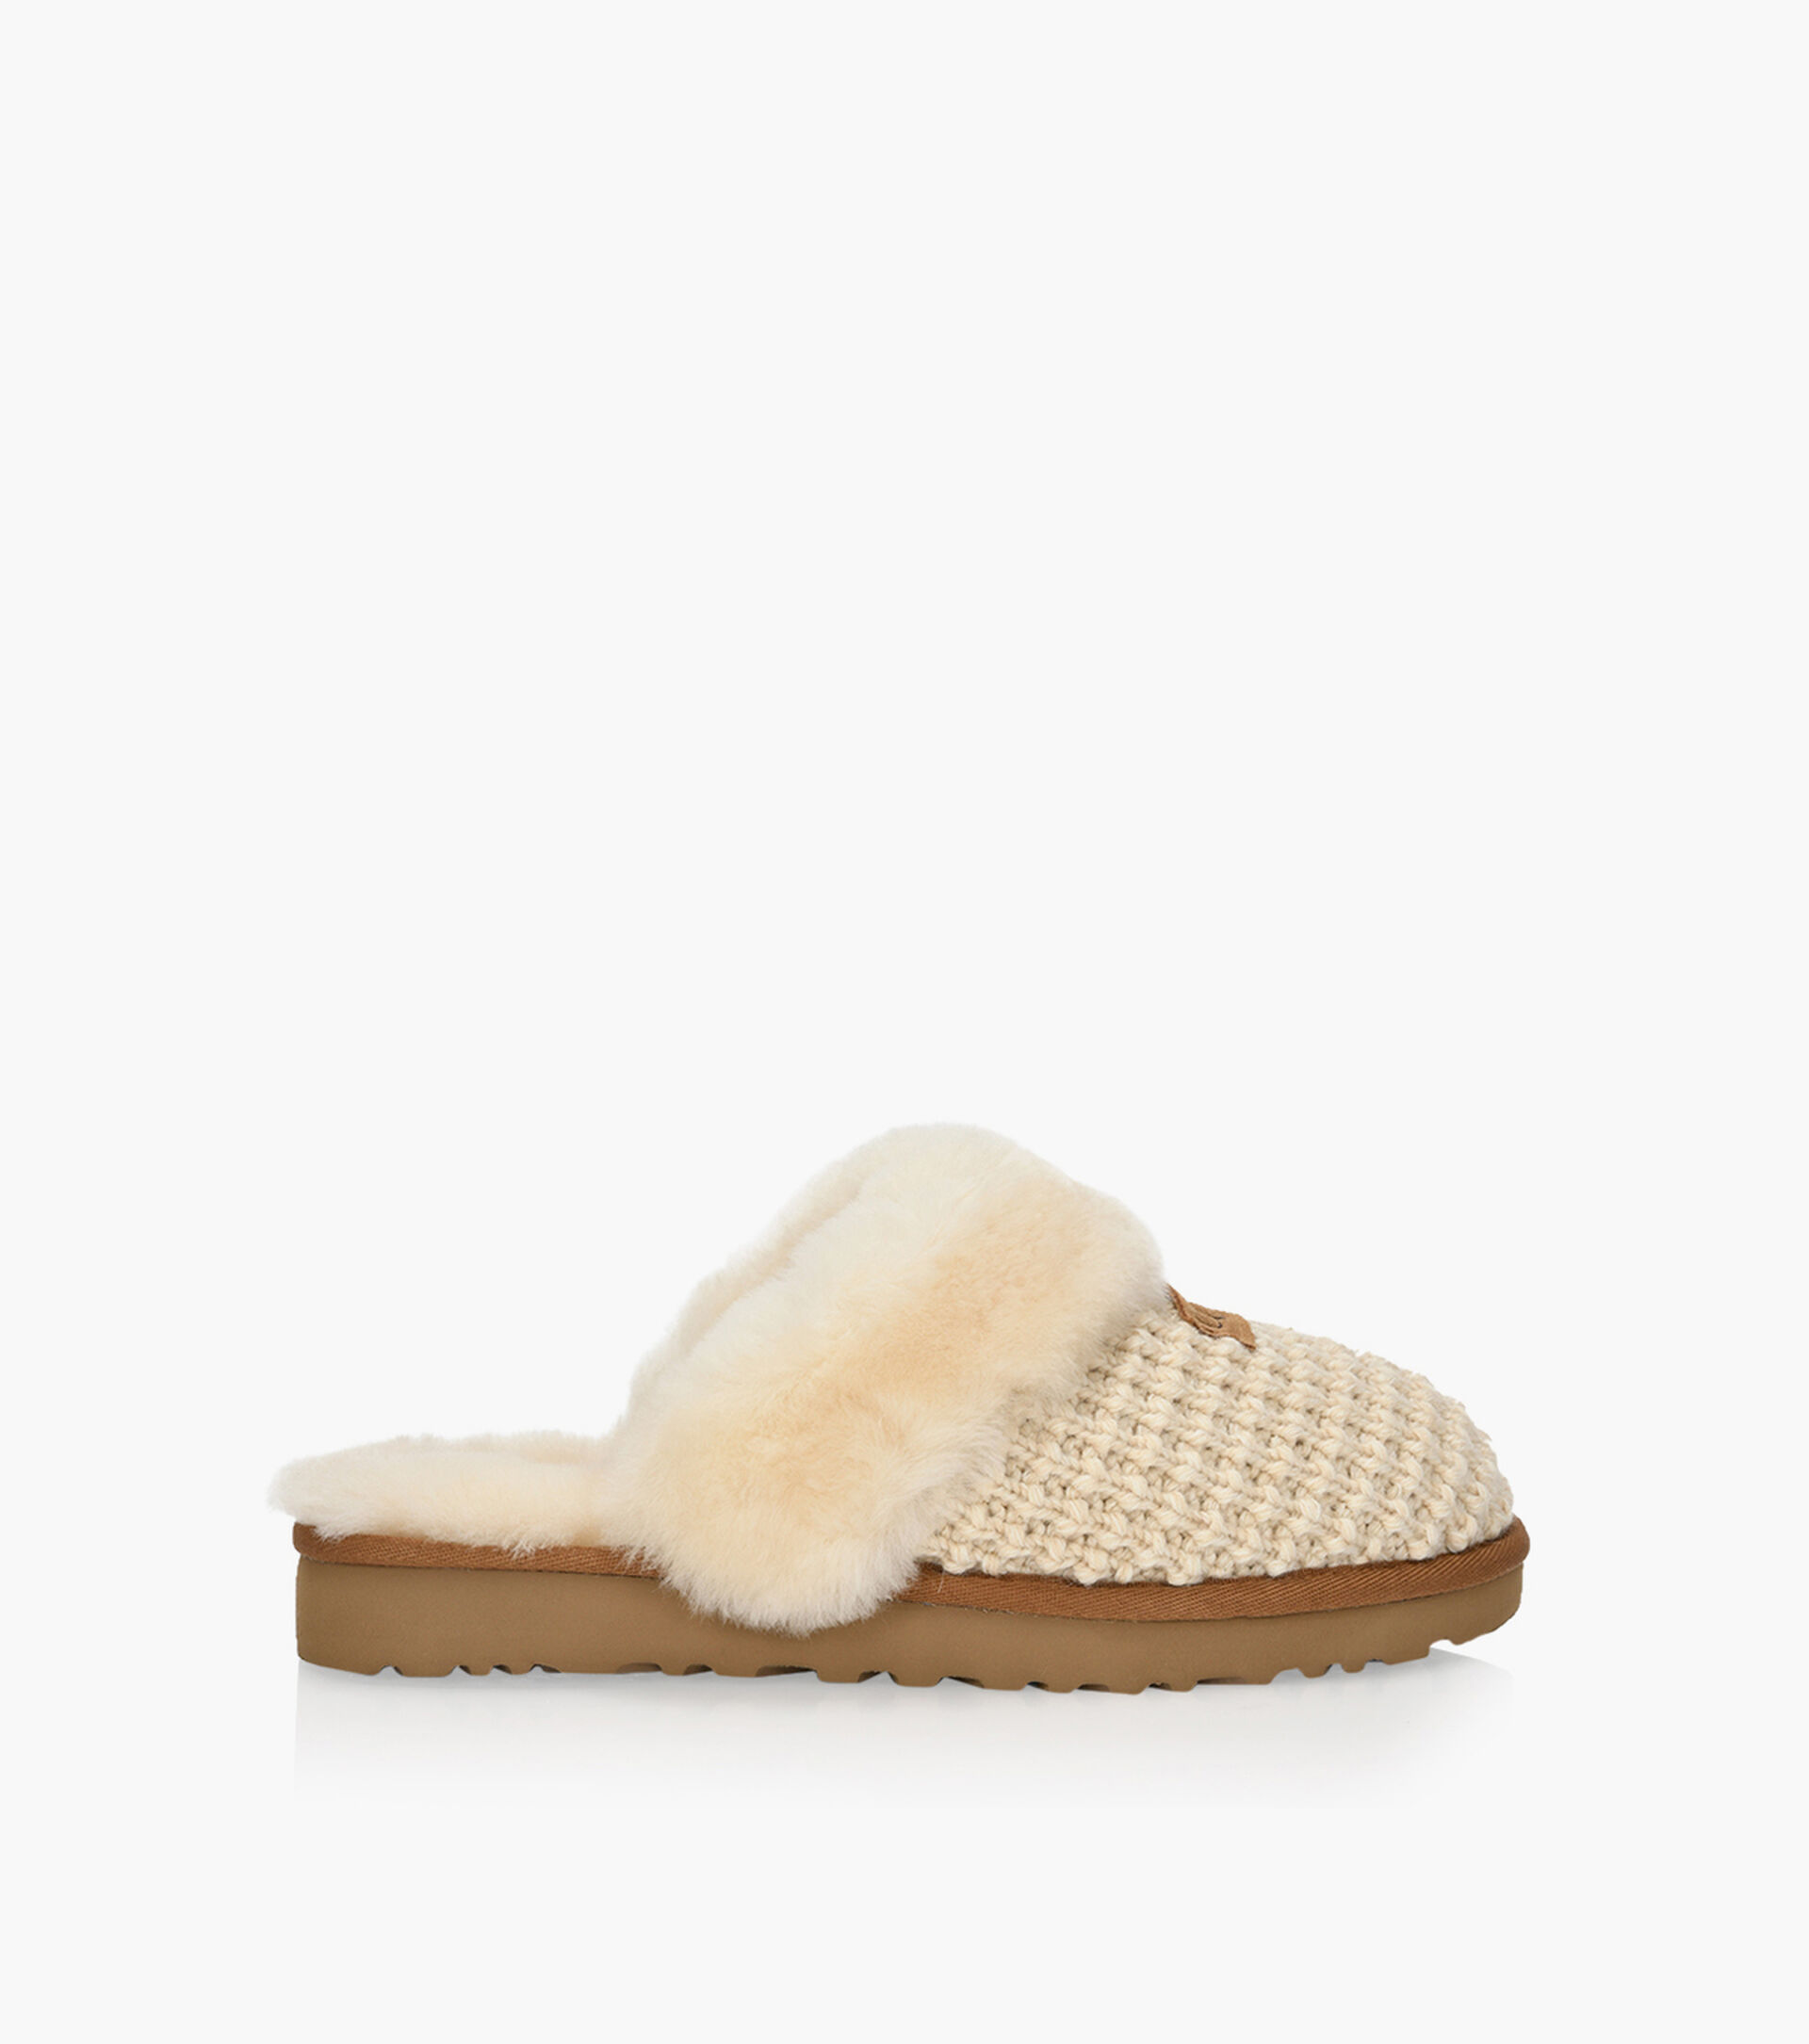 UGG COZY SLIPPER - Beige Fabric | Browns Shoes